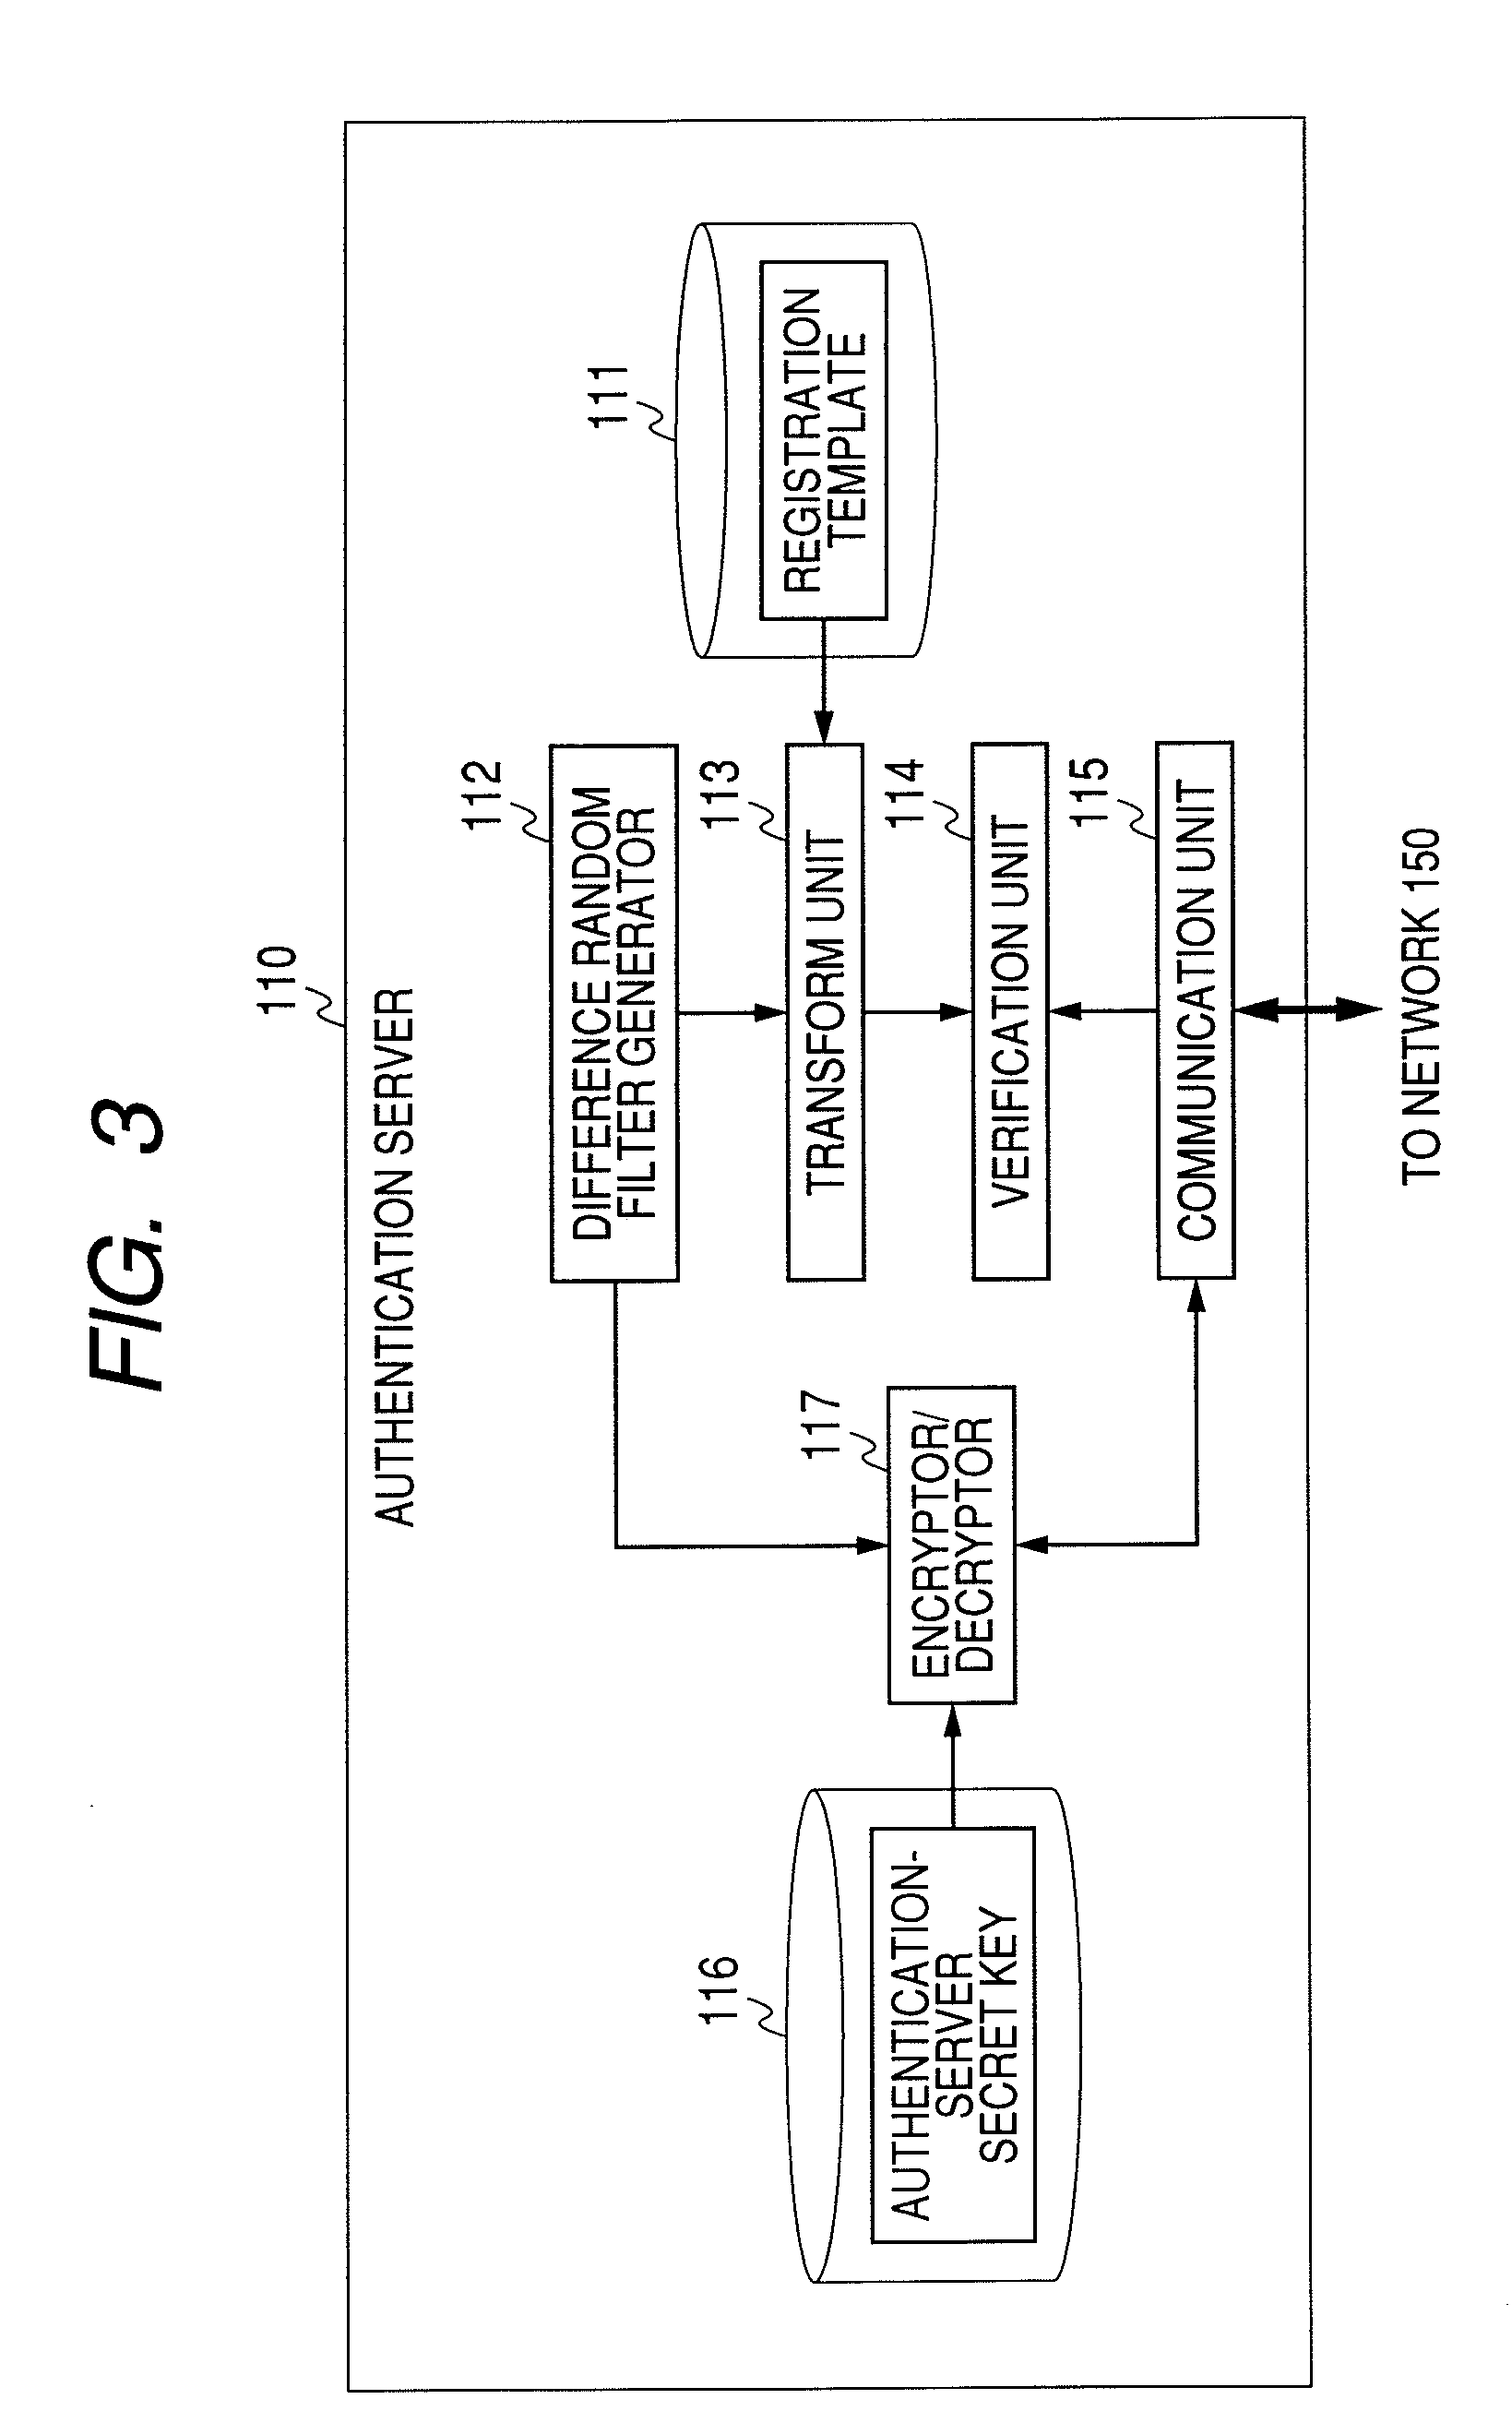 System, Server, Terminal and Tamper Resistant Device for Authenticating a User